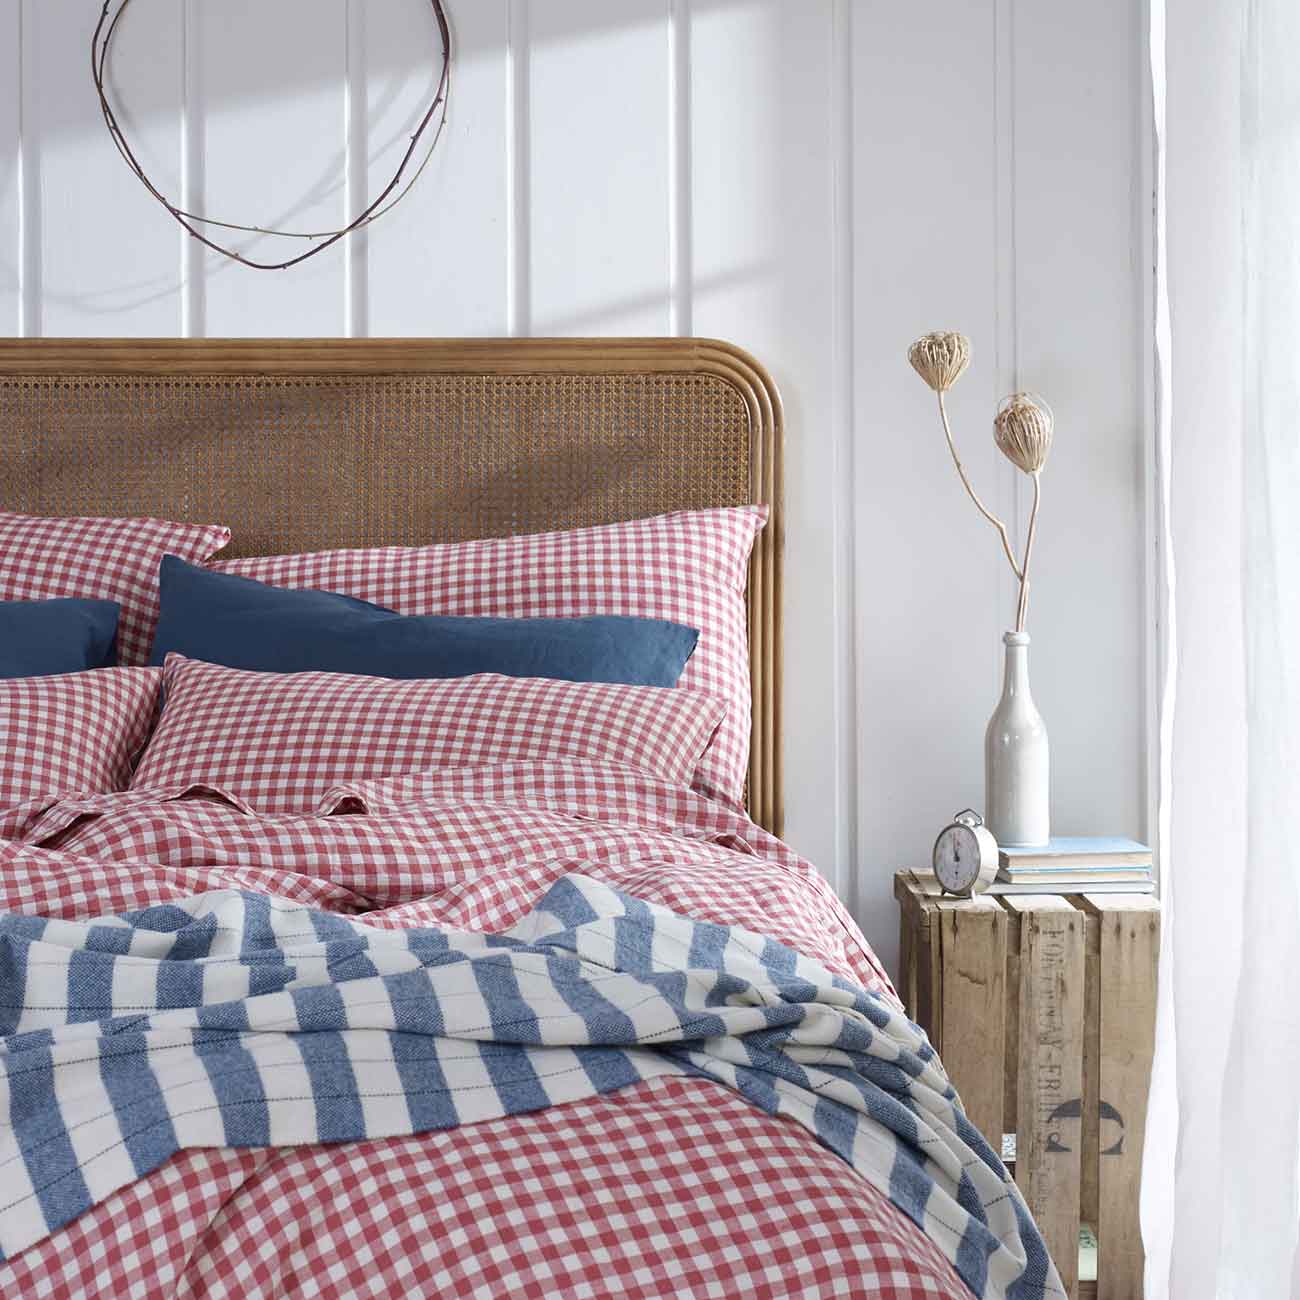 Mineral Red Gingham and Deep Teal Linen Bedding with a  Warm Blue Checked Stripe Wool Blanket